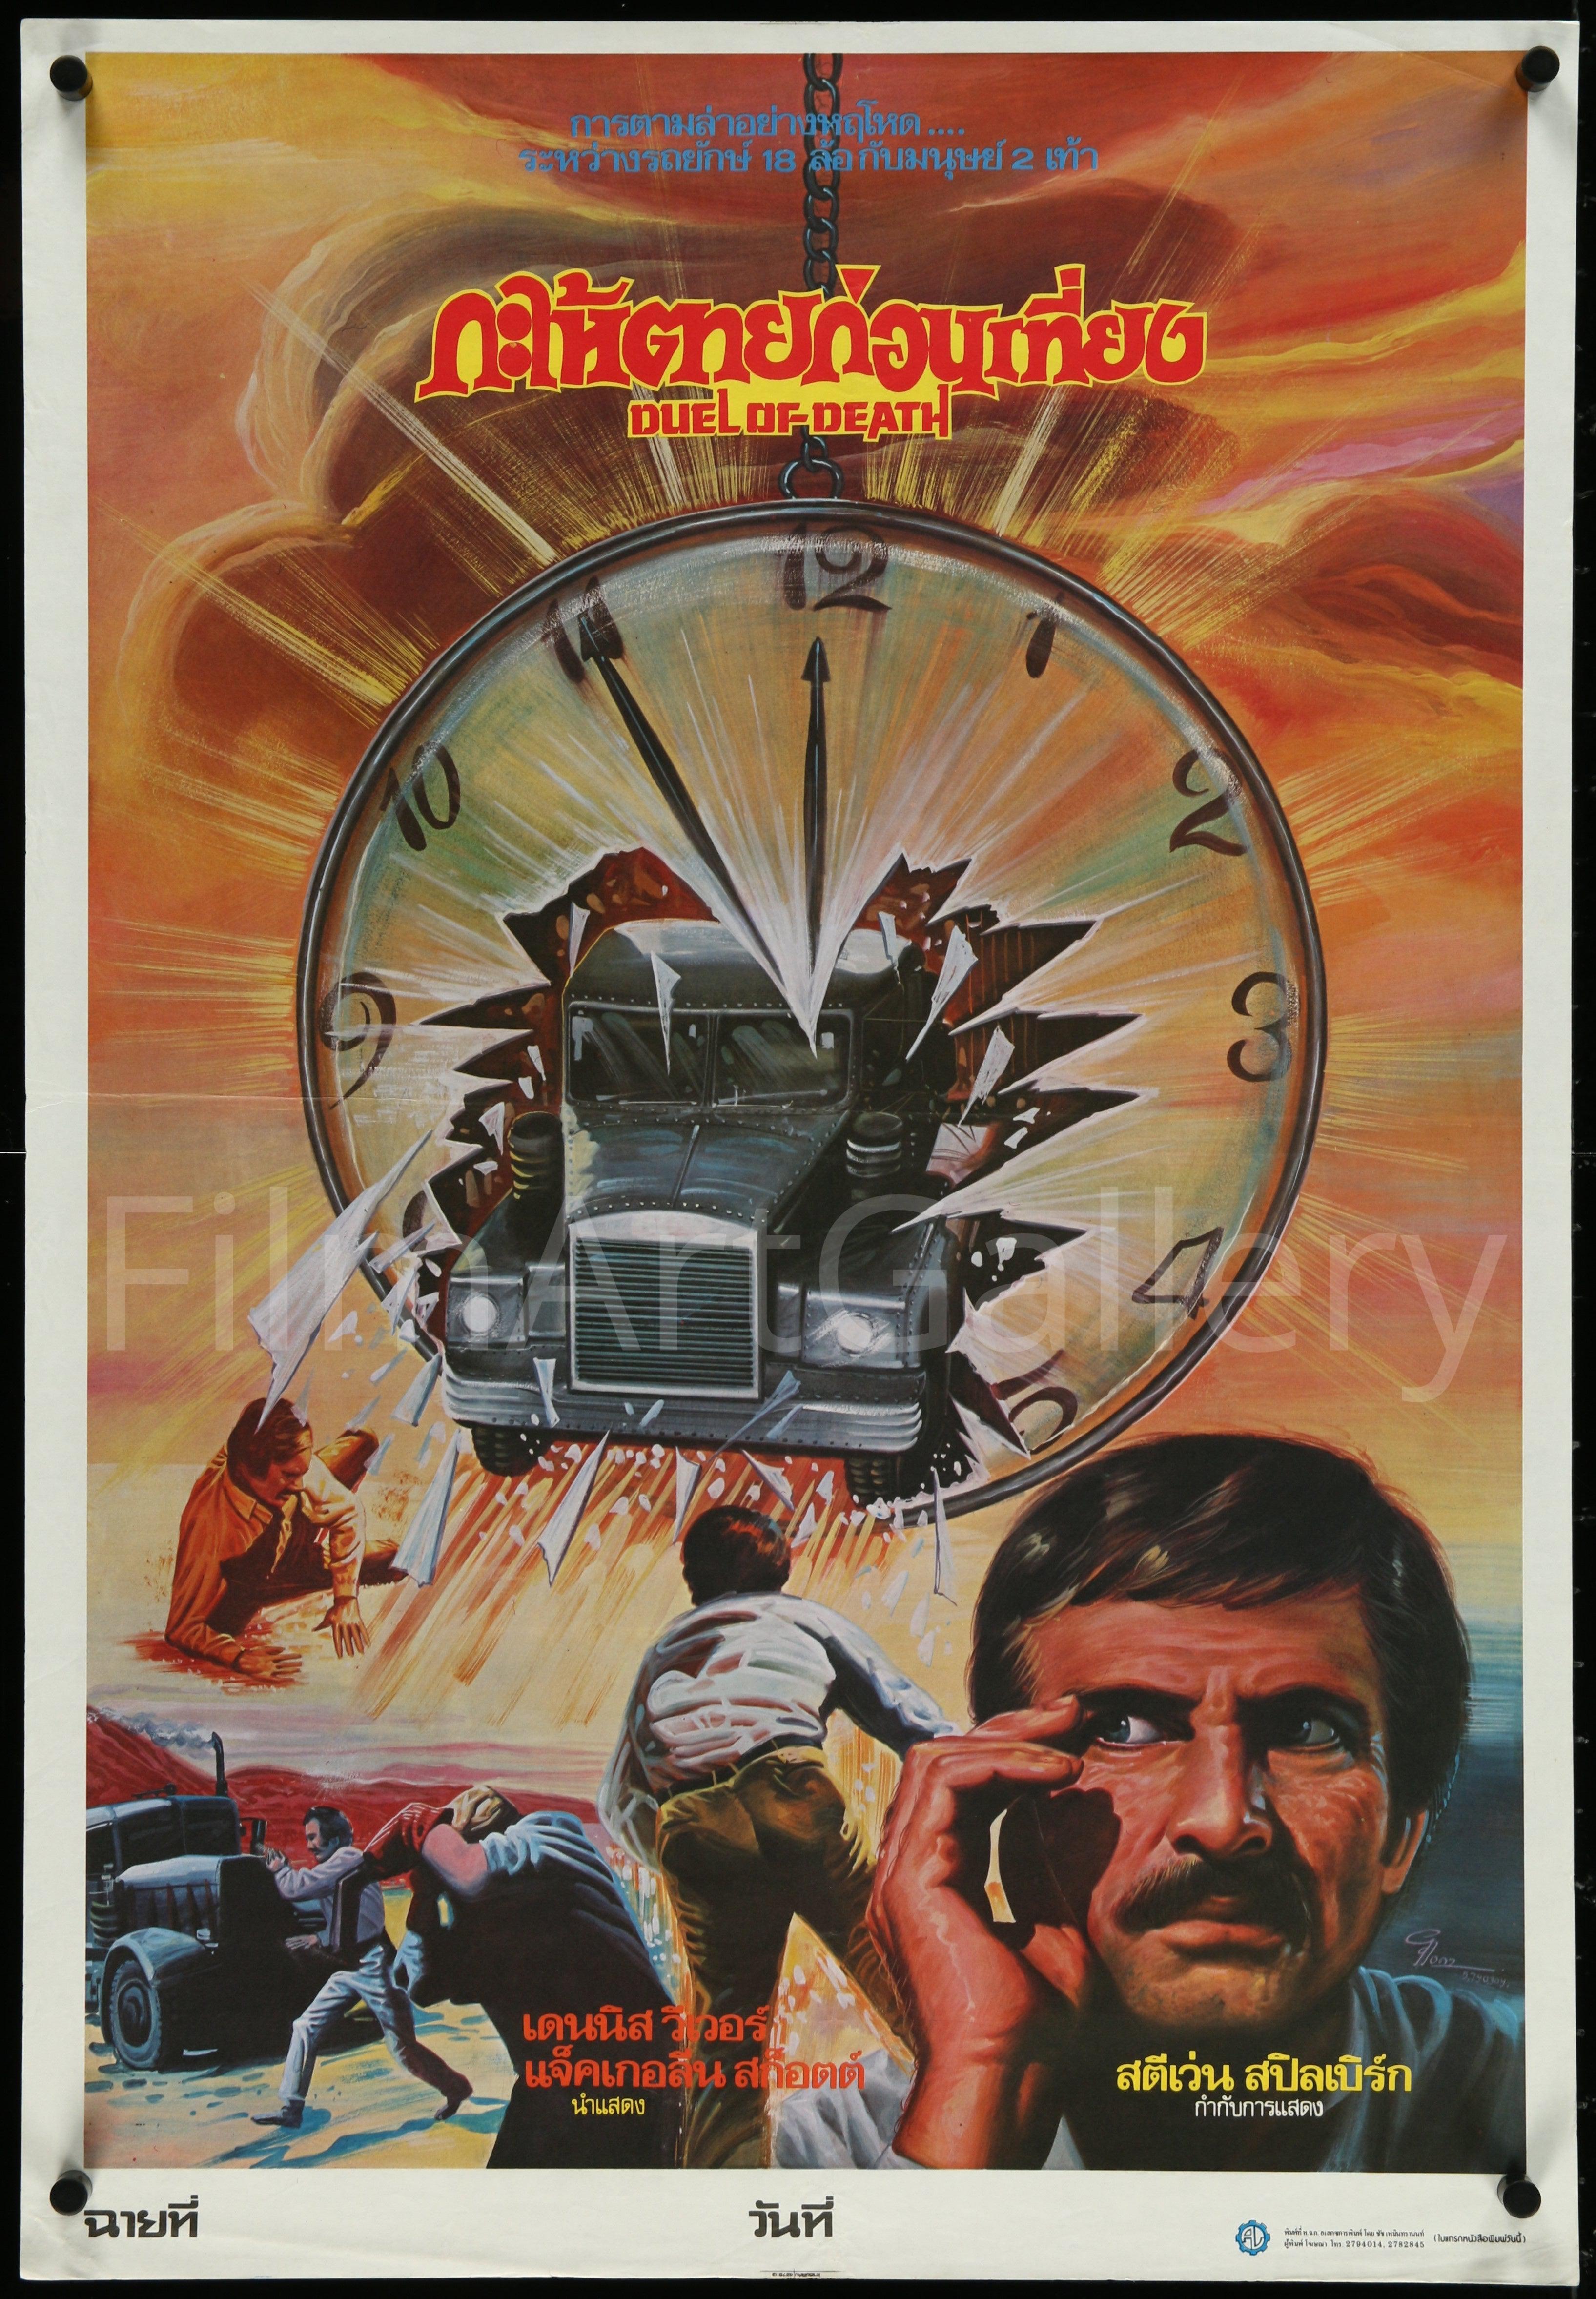 duel movie poster